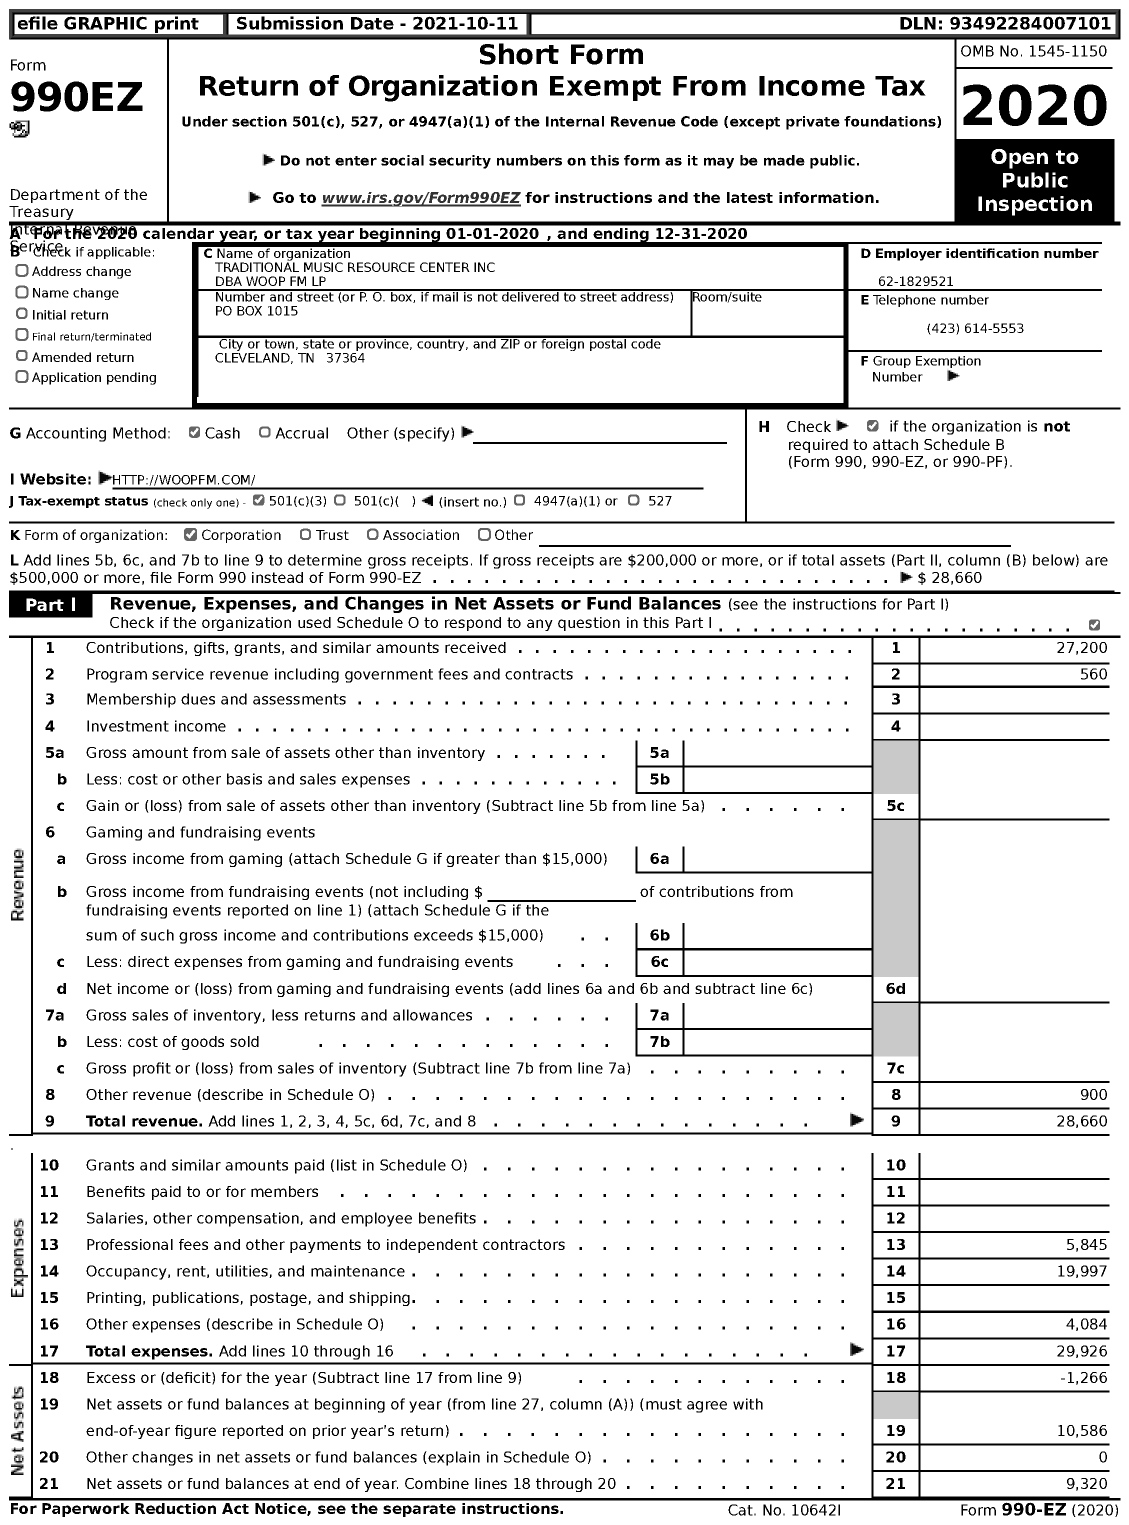 Image of first page of 2020 Form 990EZ for Woop FM LP